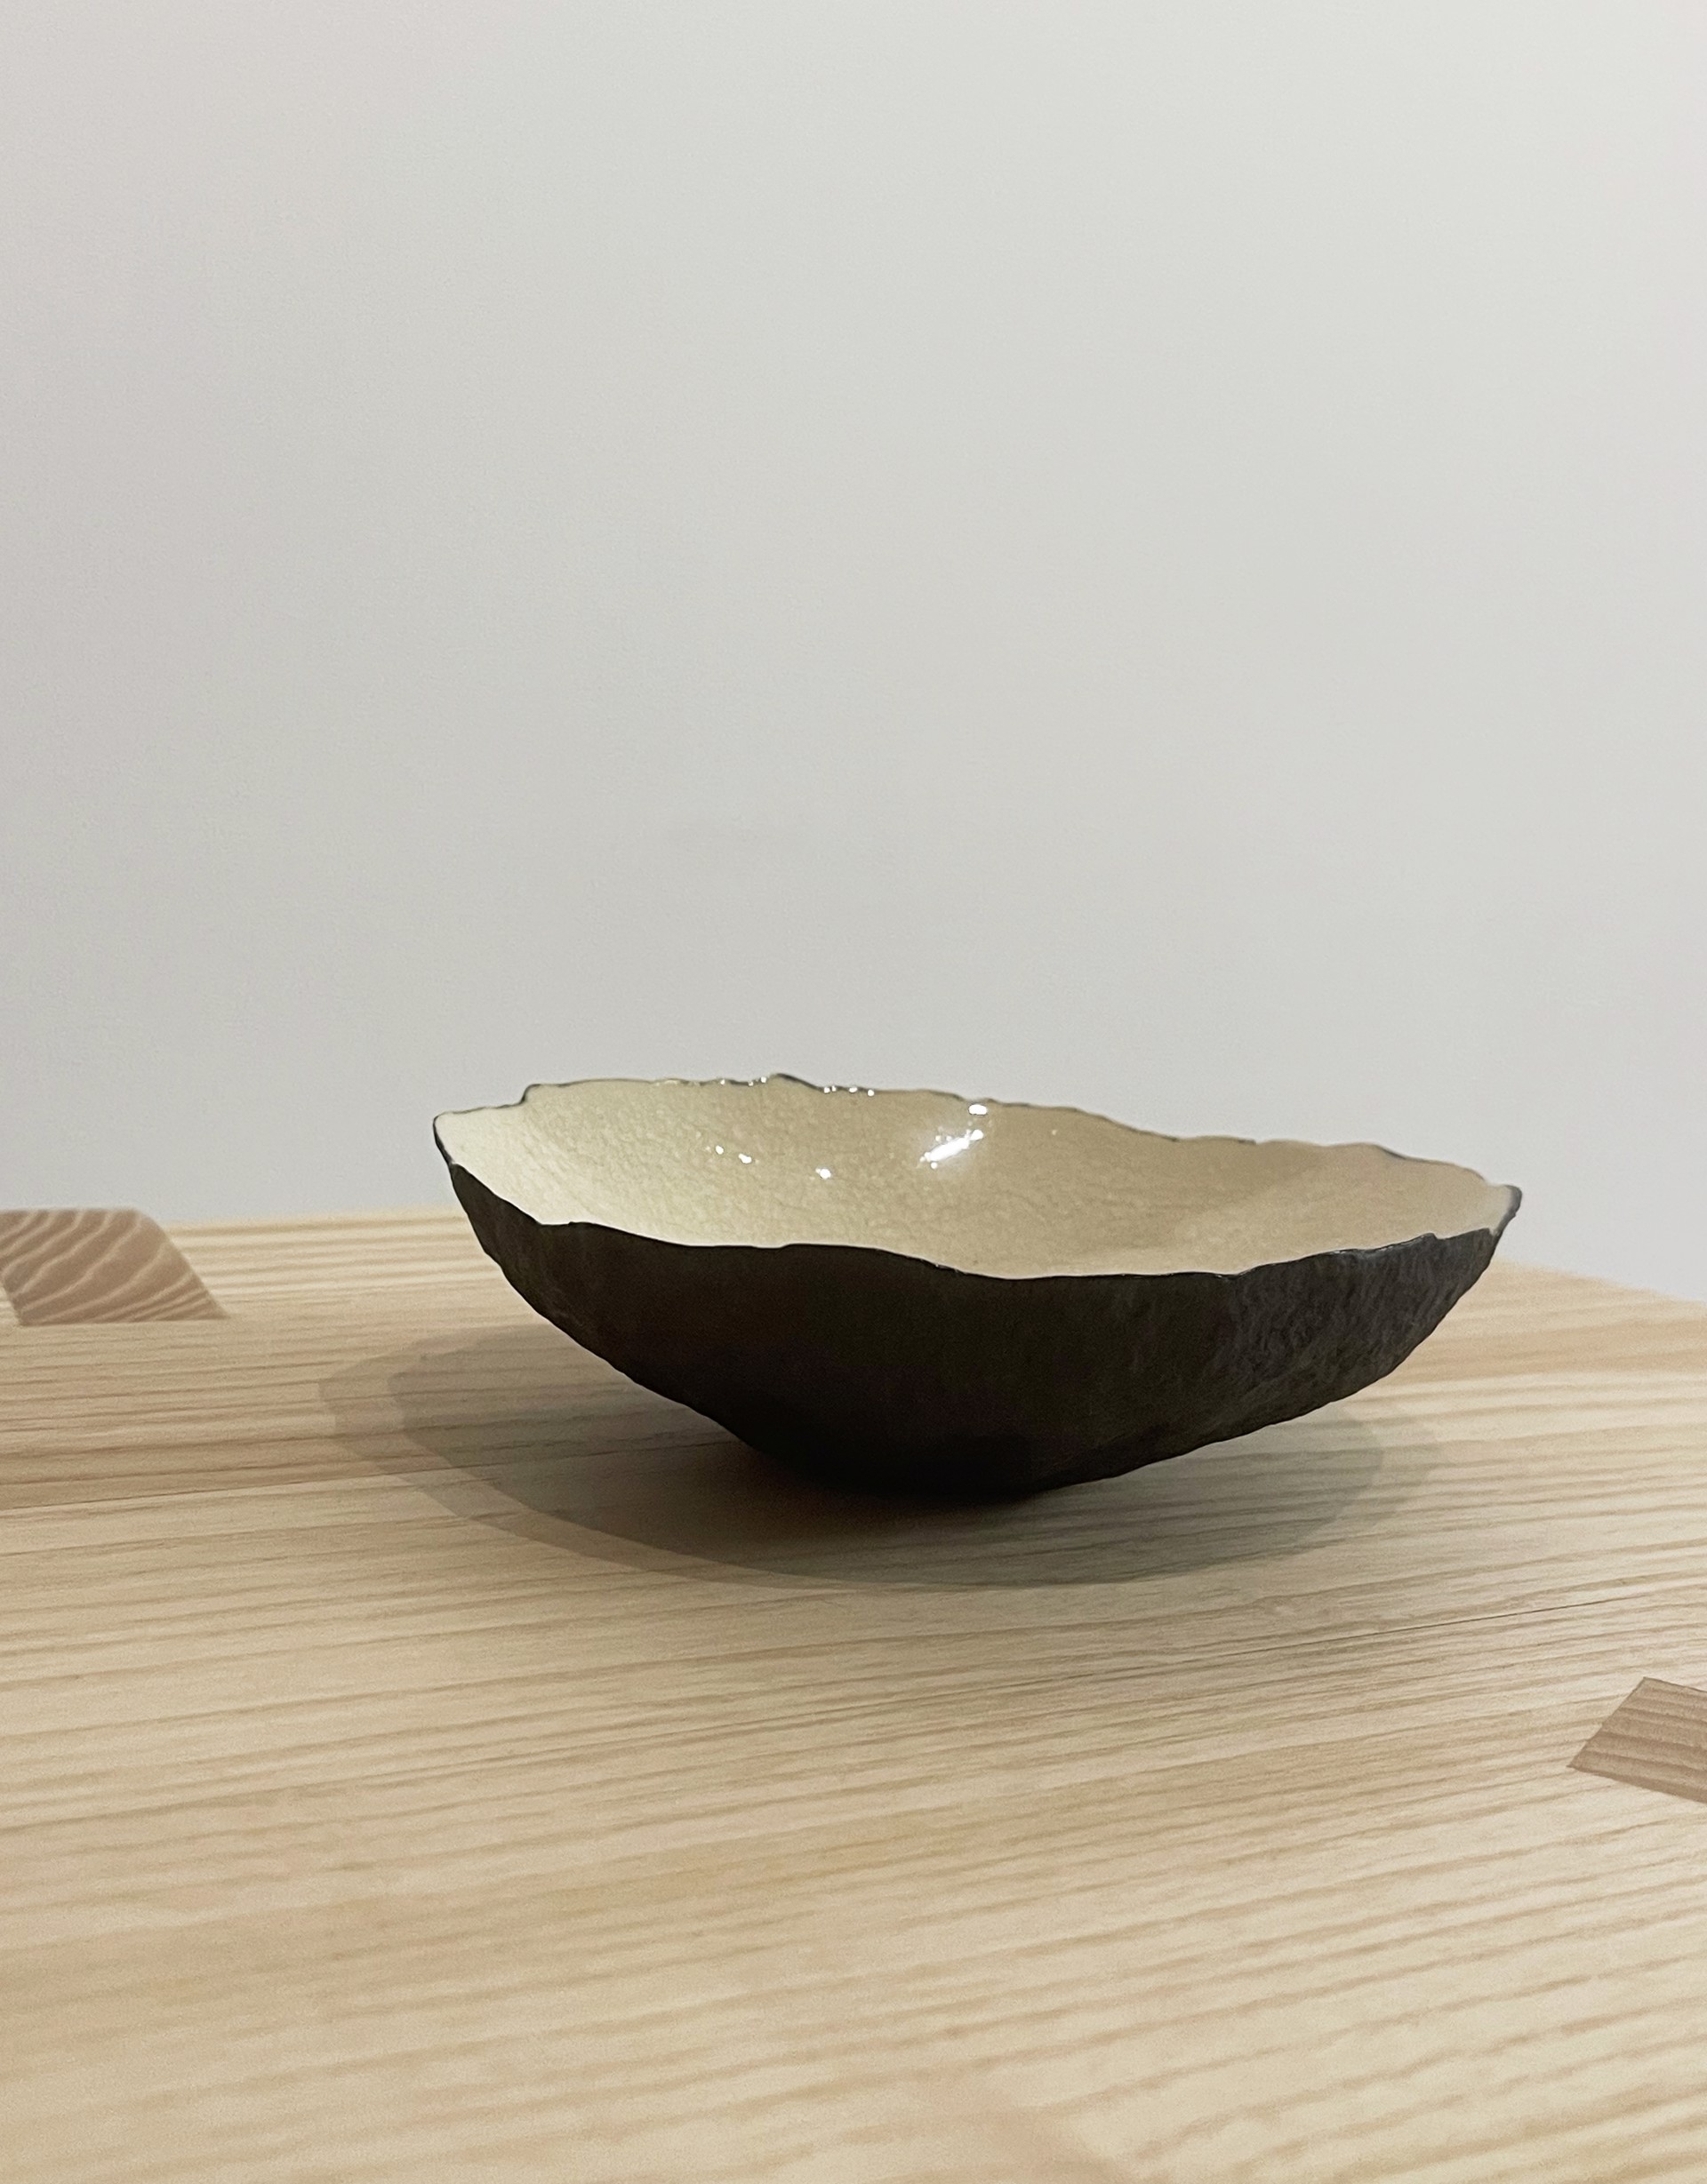 Vessel with white crackles - one of 2 by Cristina Salusti